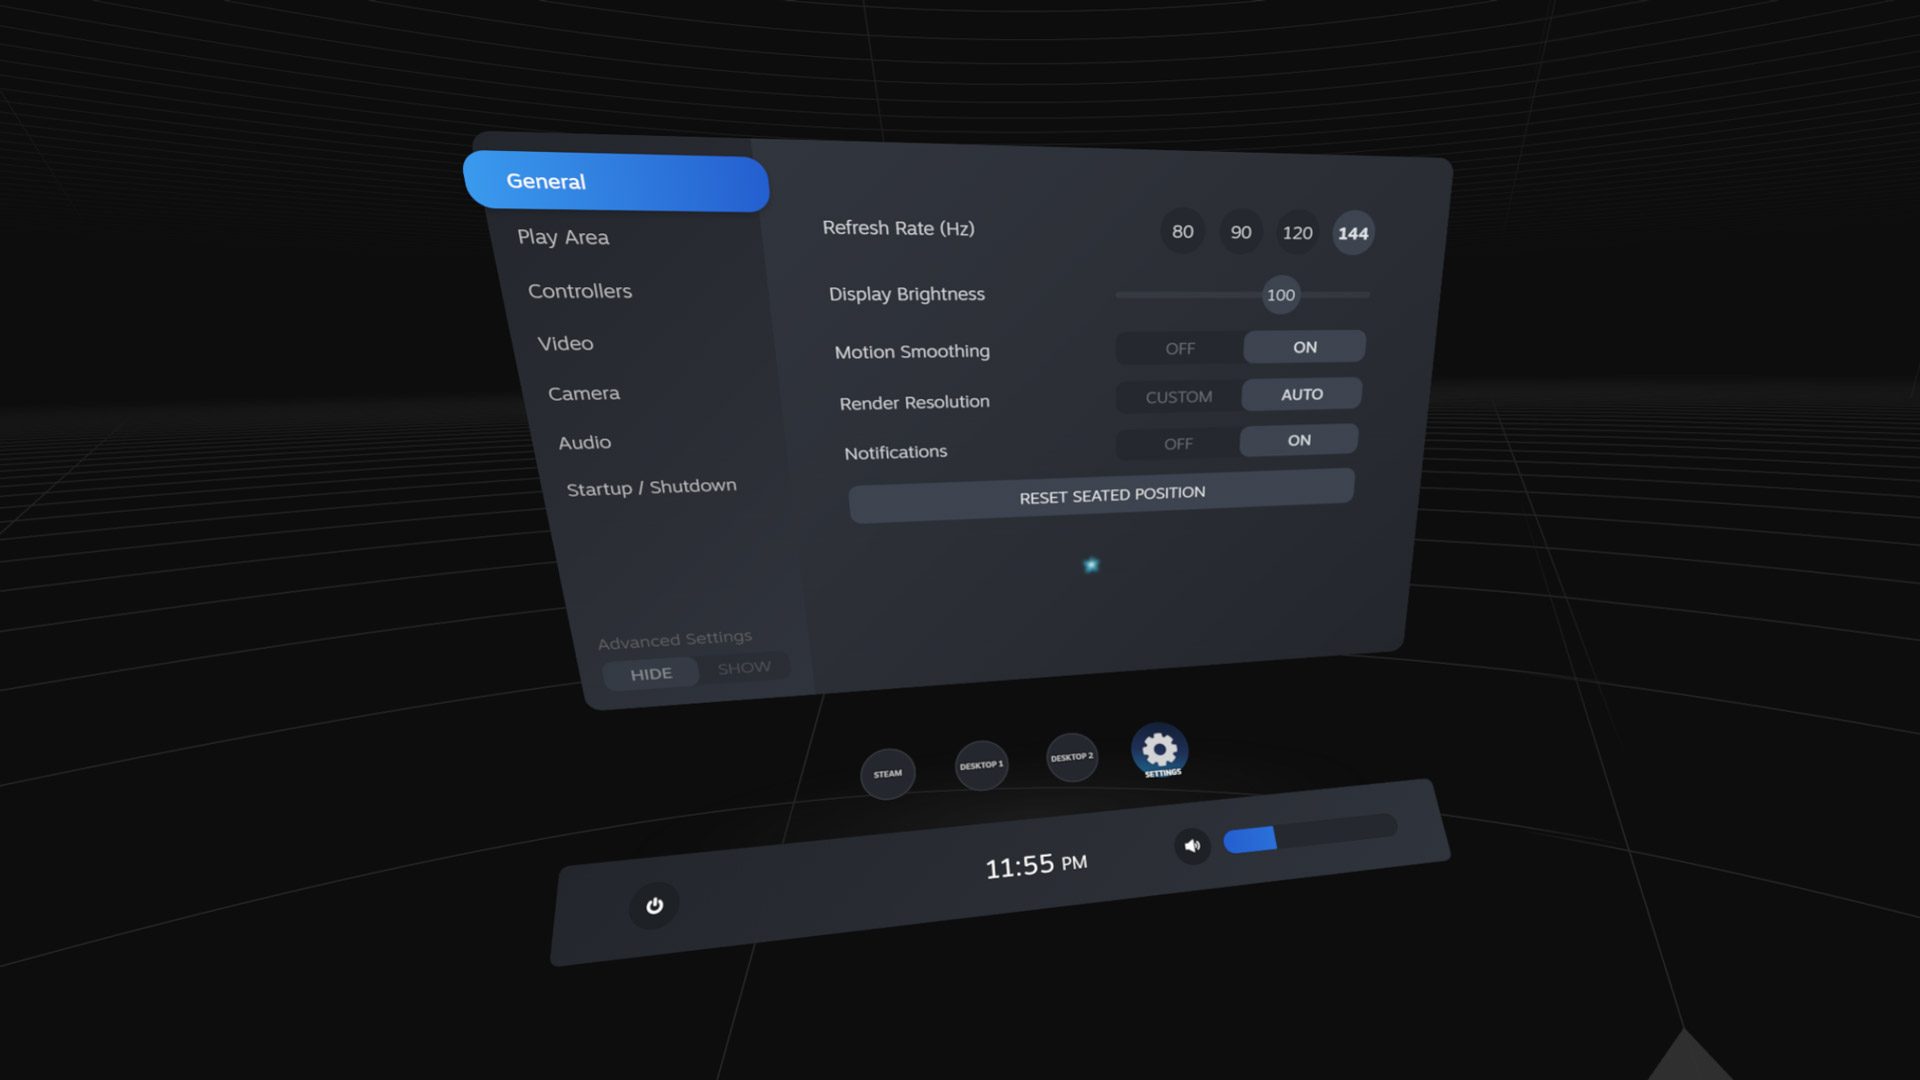 SteamVR 2.0: Valve Releases the New Update with Brand New UI for the  Dashboard Along with Other Changes